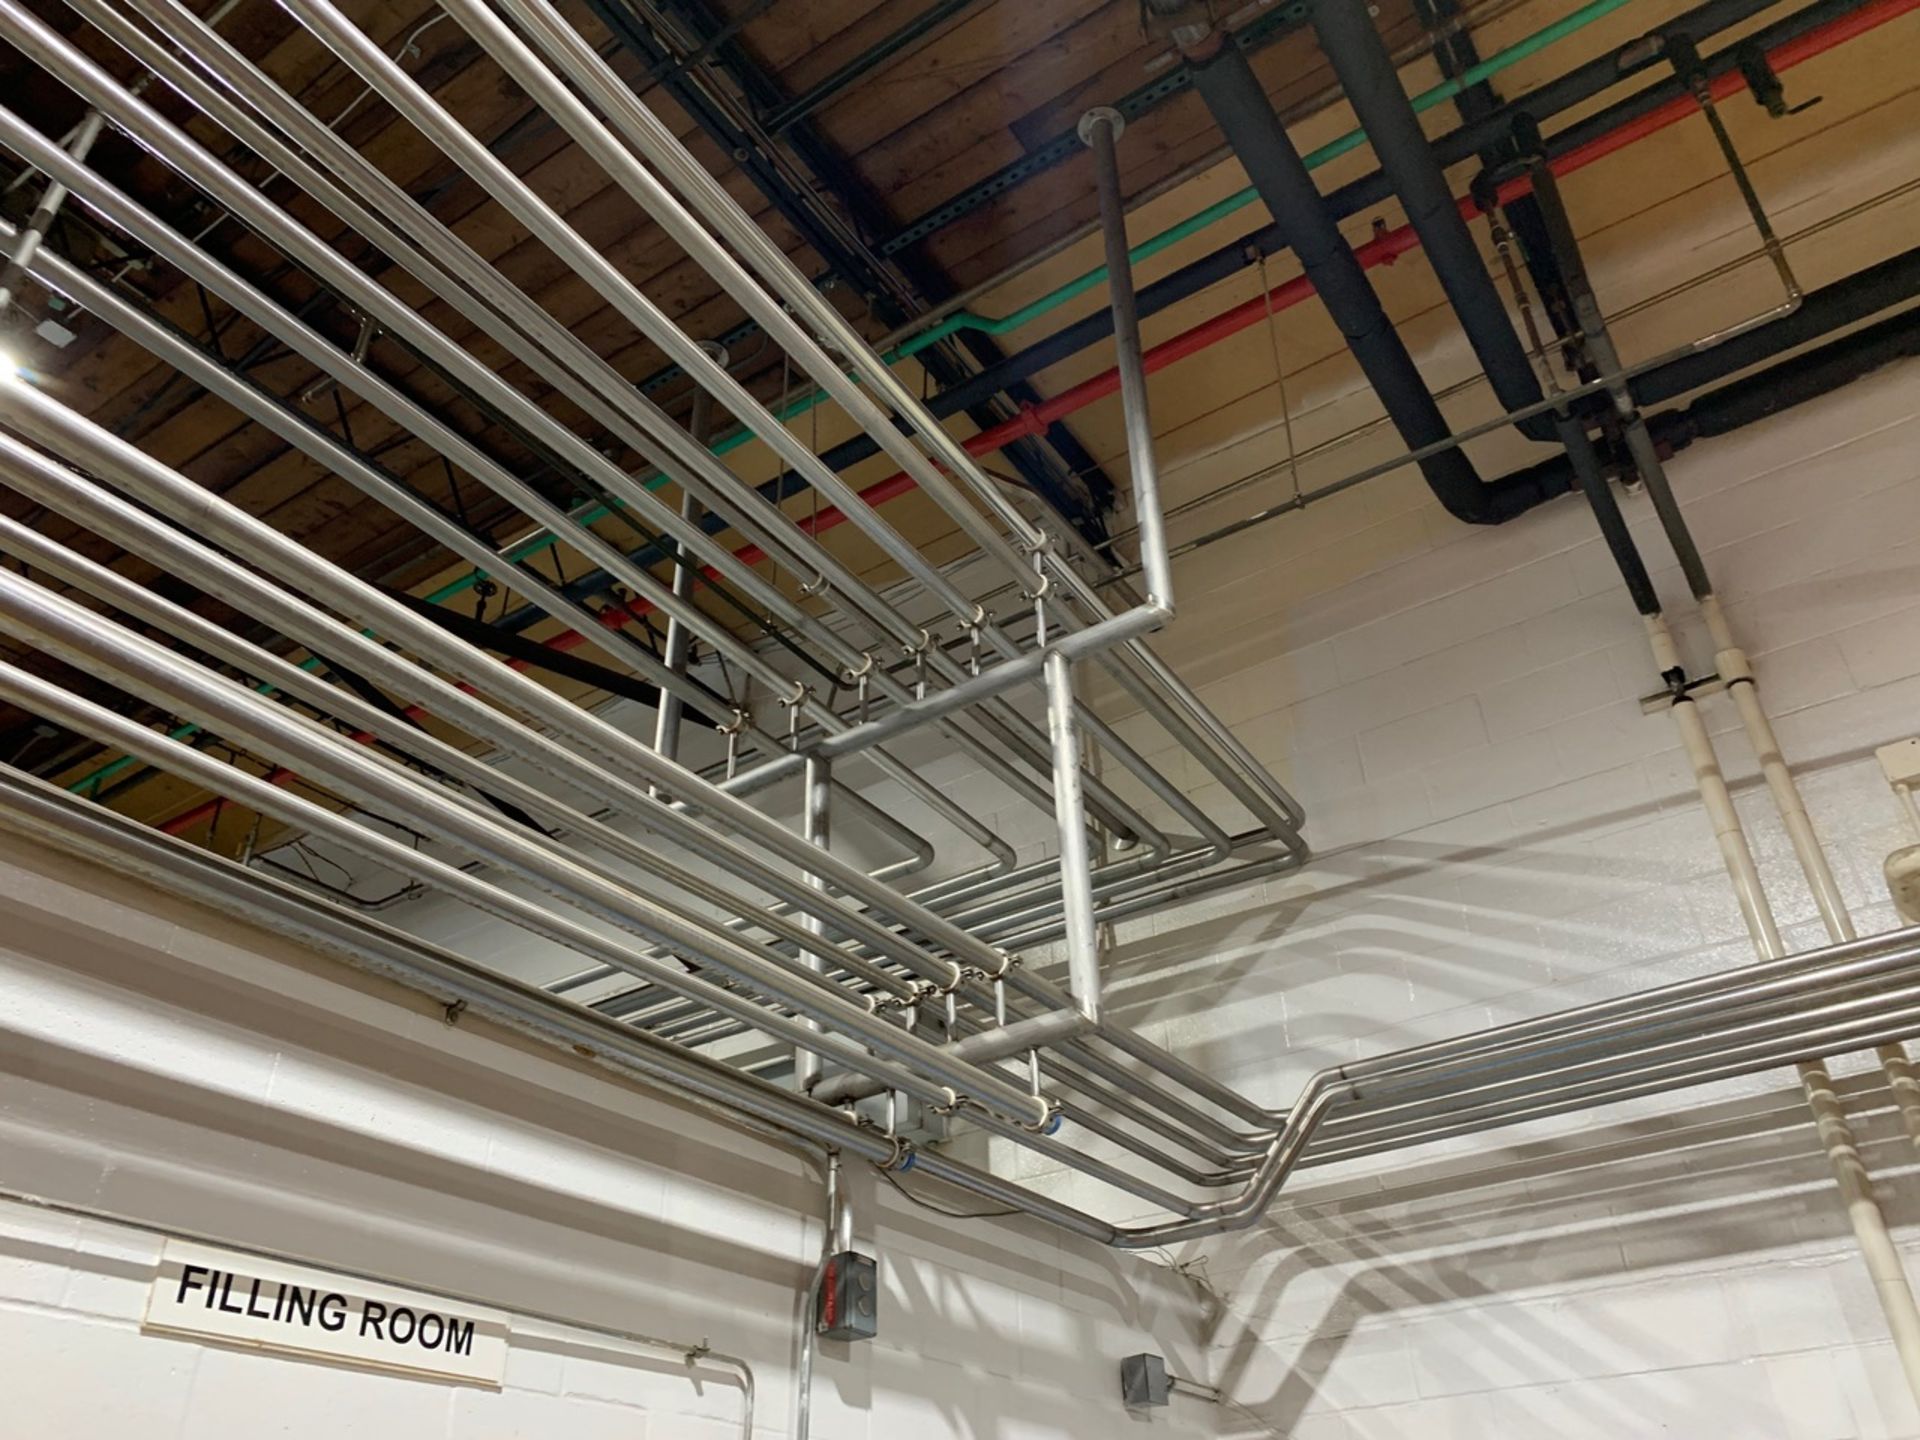 Lot of Stainless Steel Piping in Ceiling - 2 Inch - Image 4 of 6